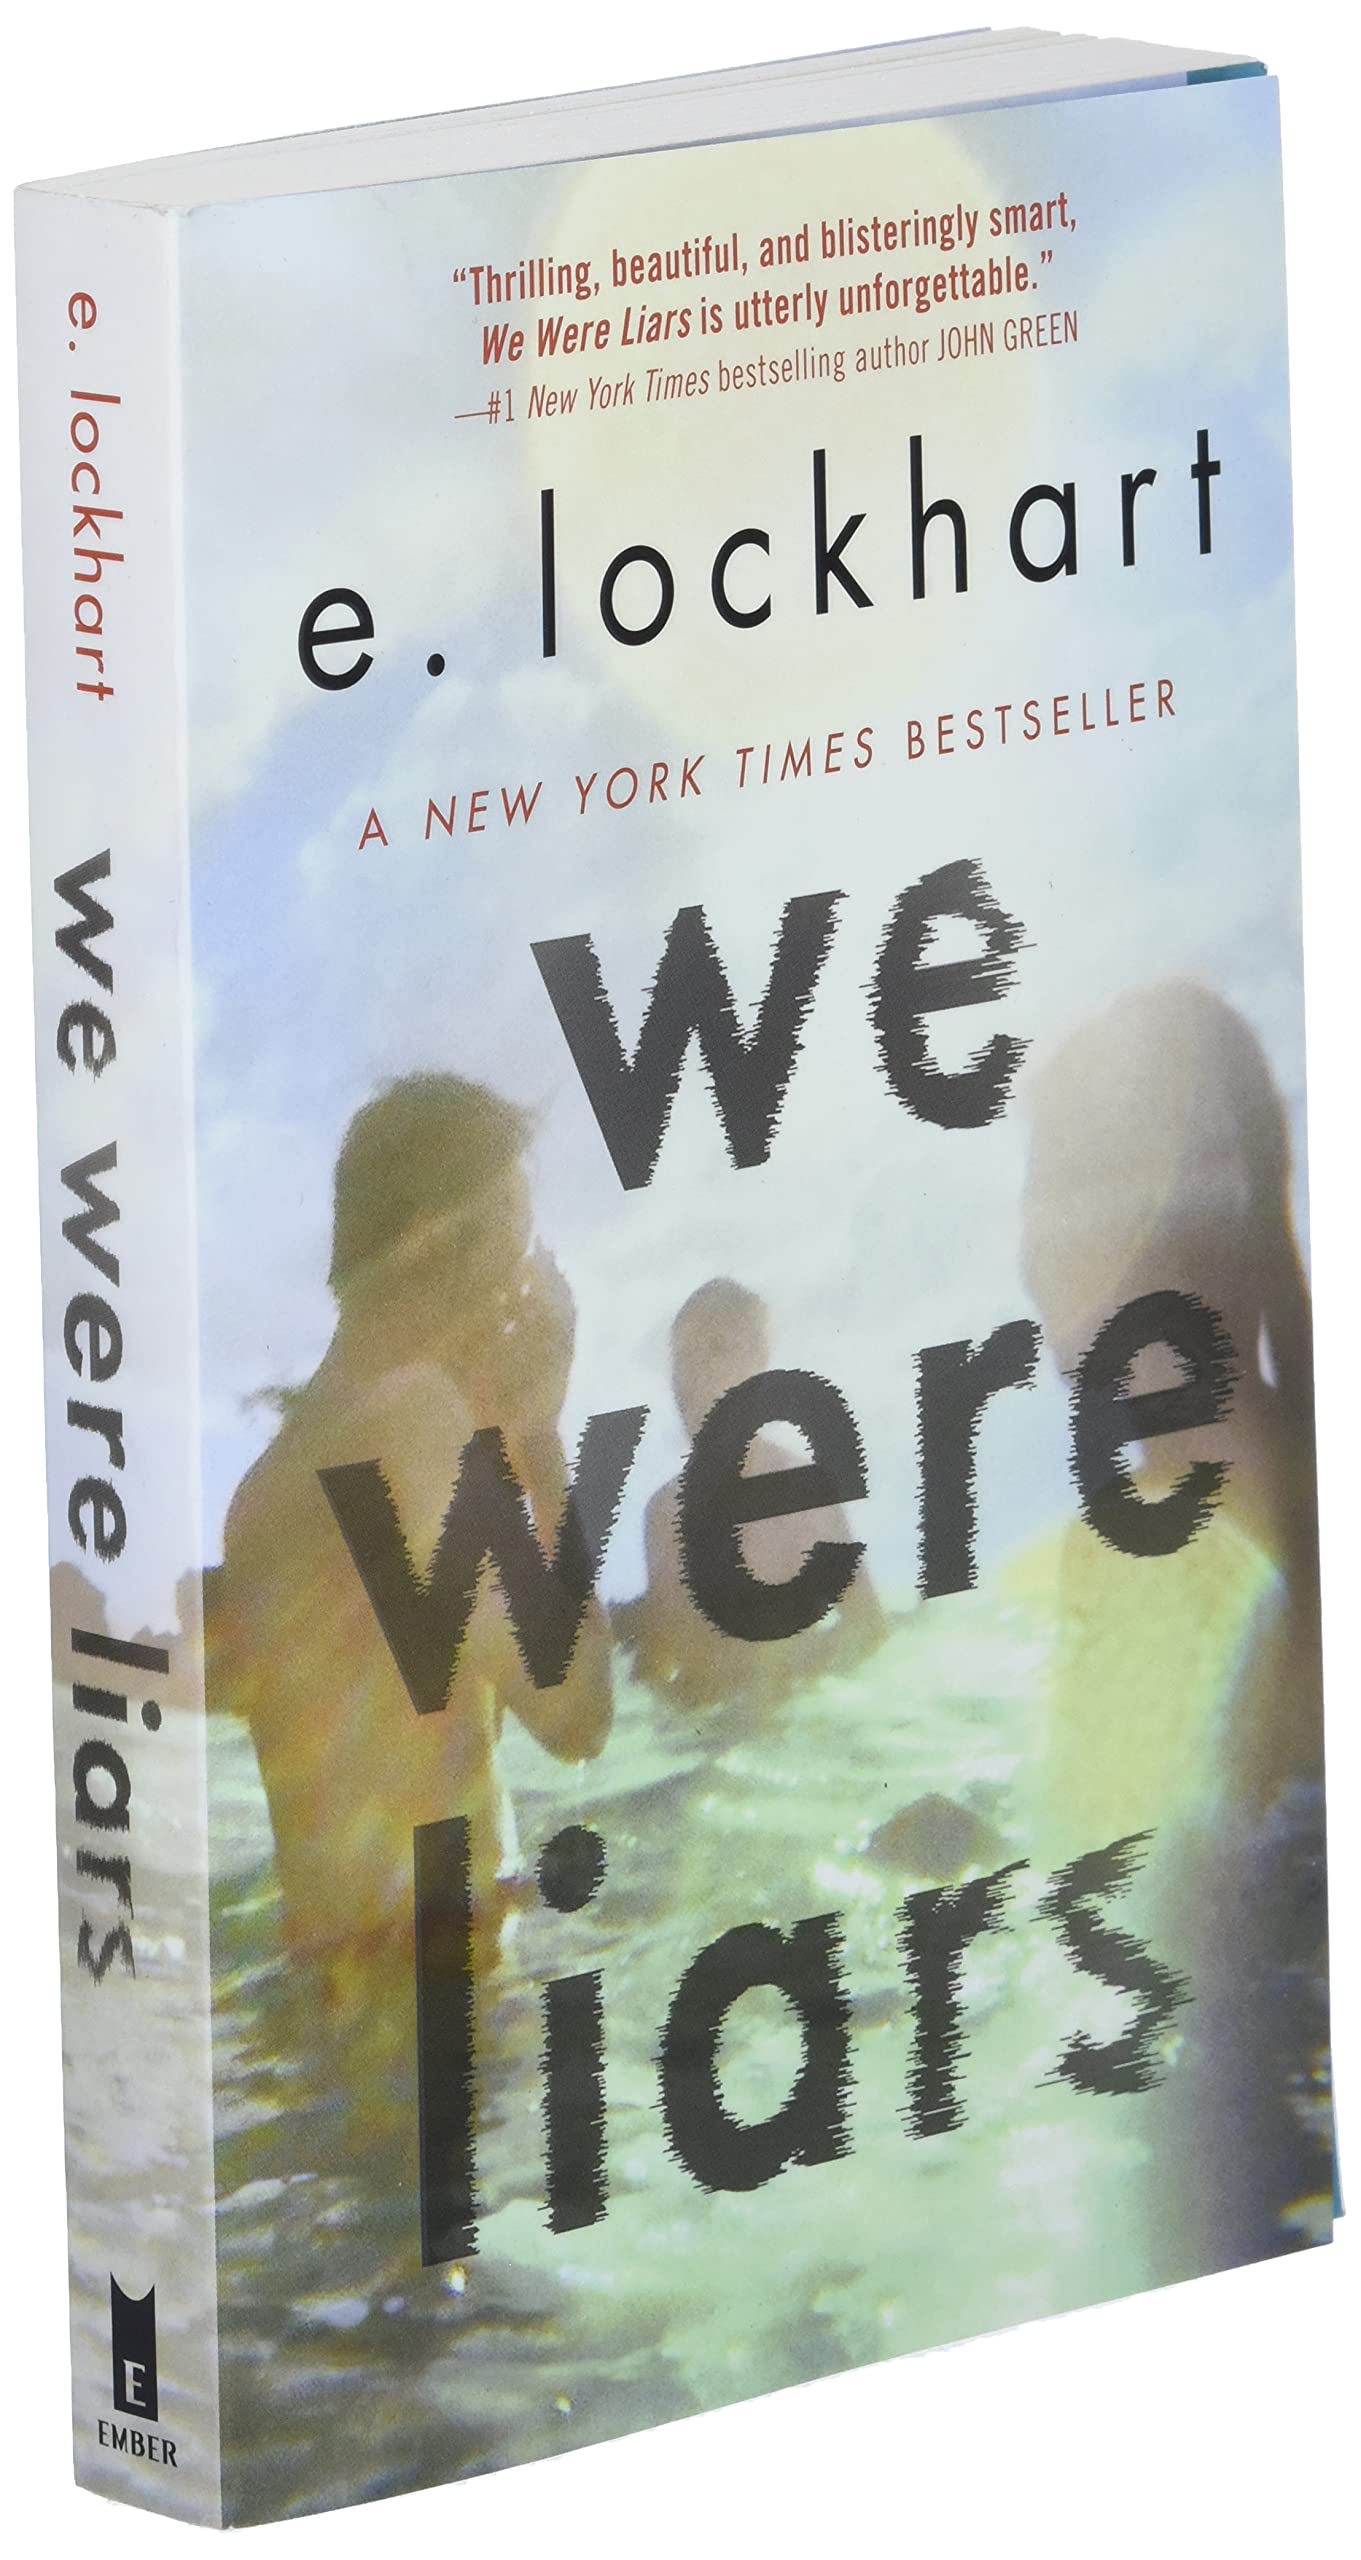 We Were Liars Paperback by E. Lockhart